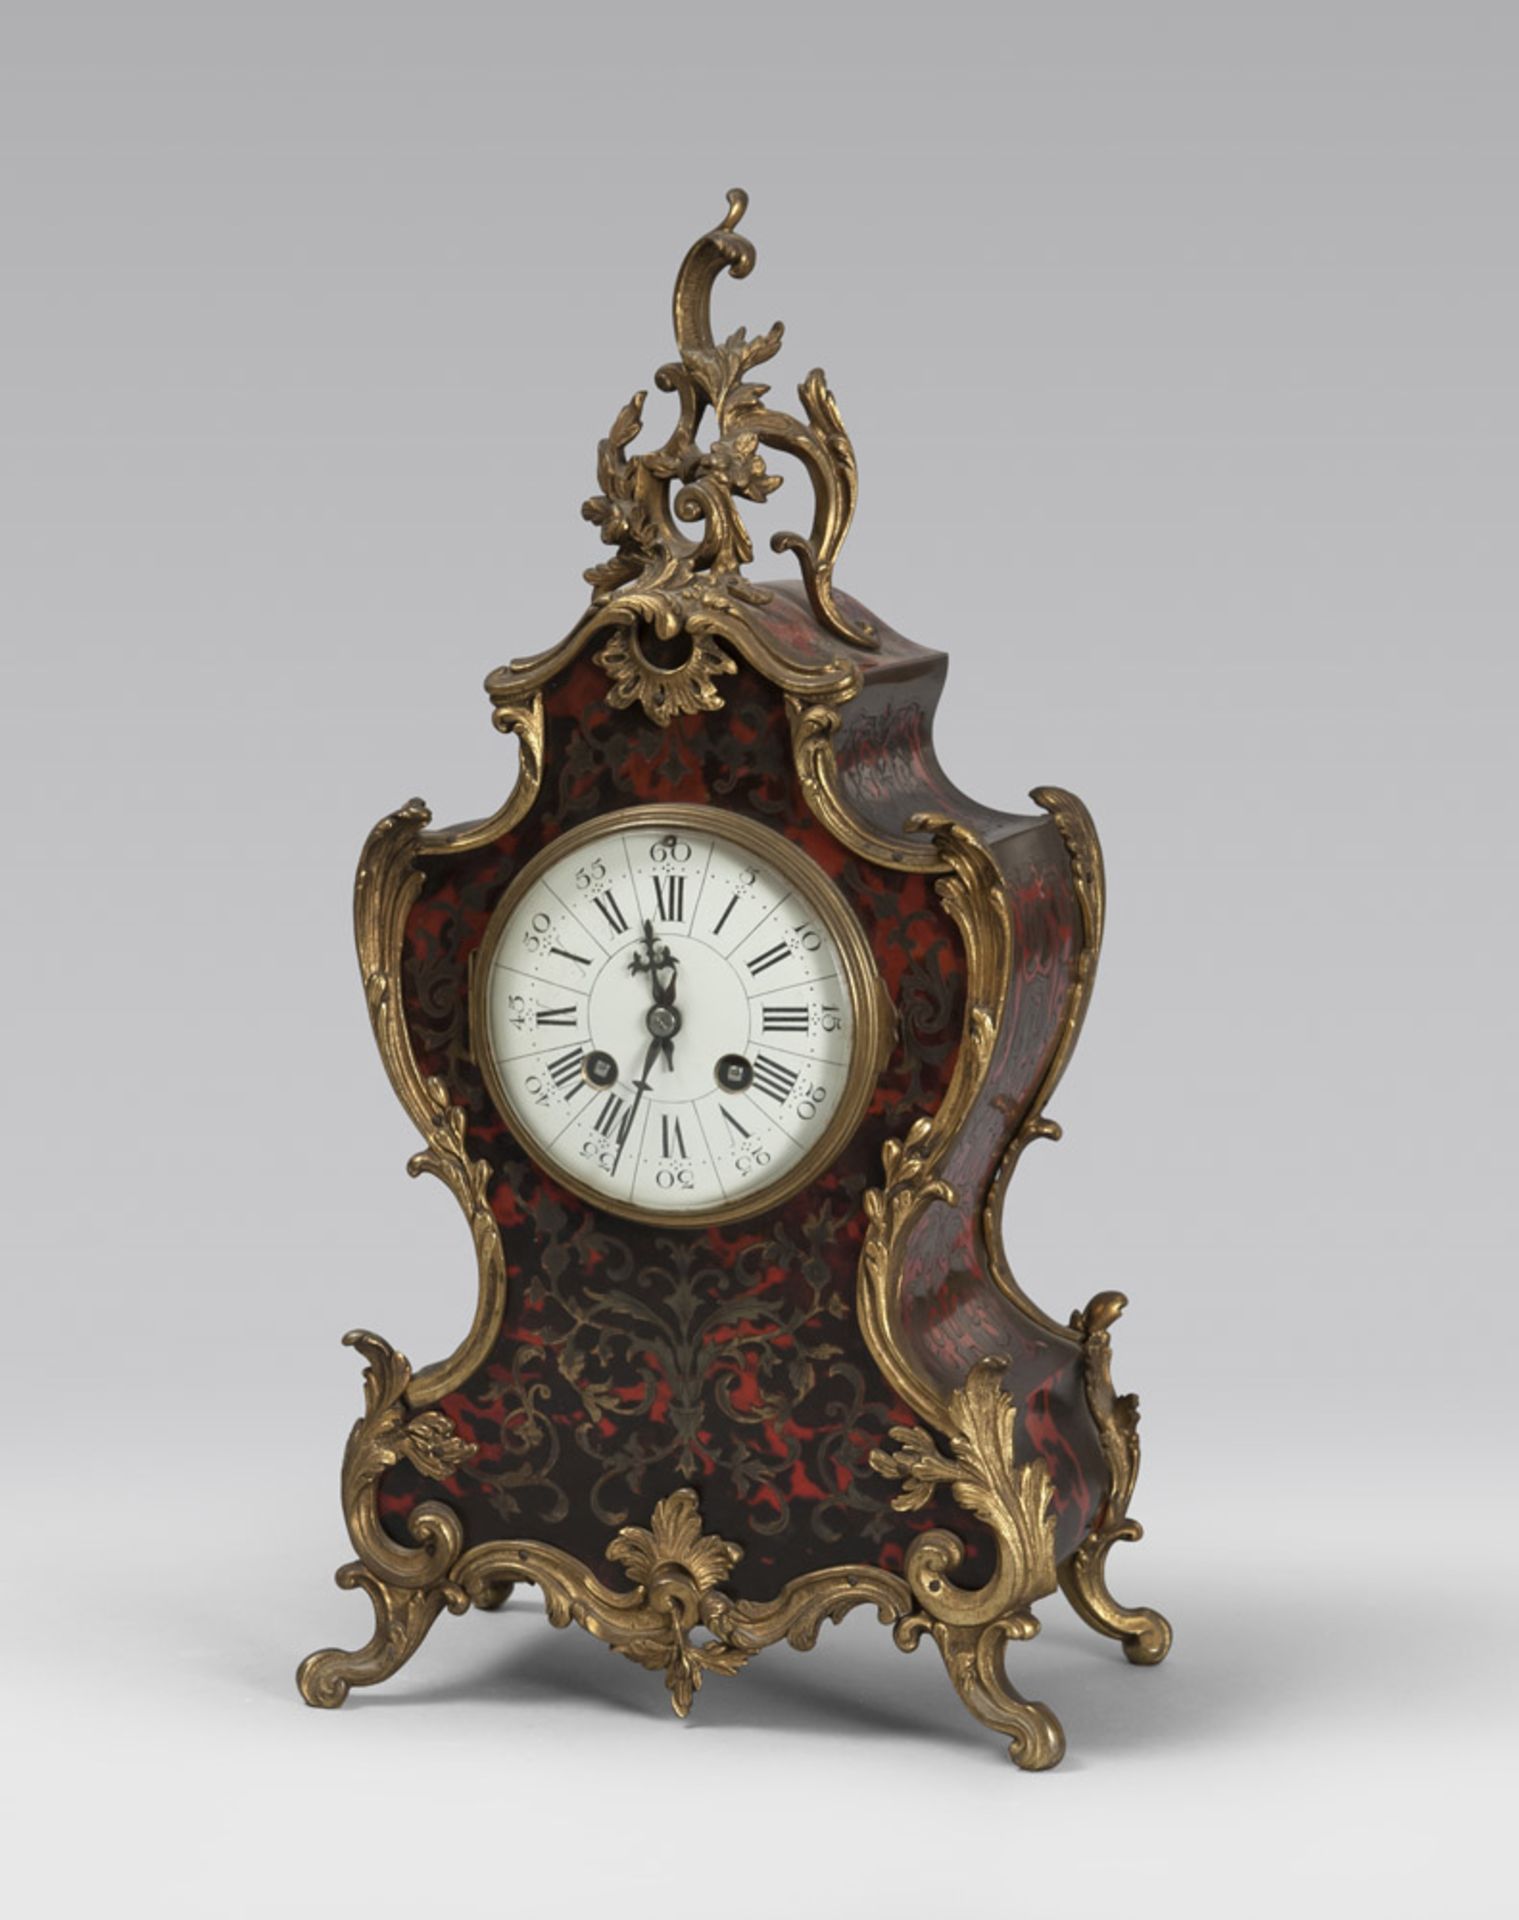 Table clock, style Boulle, France early 20th century. Measures cm. 44 x 23 x 14.OROLOGIO DA